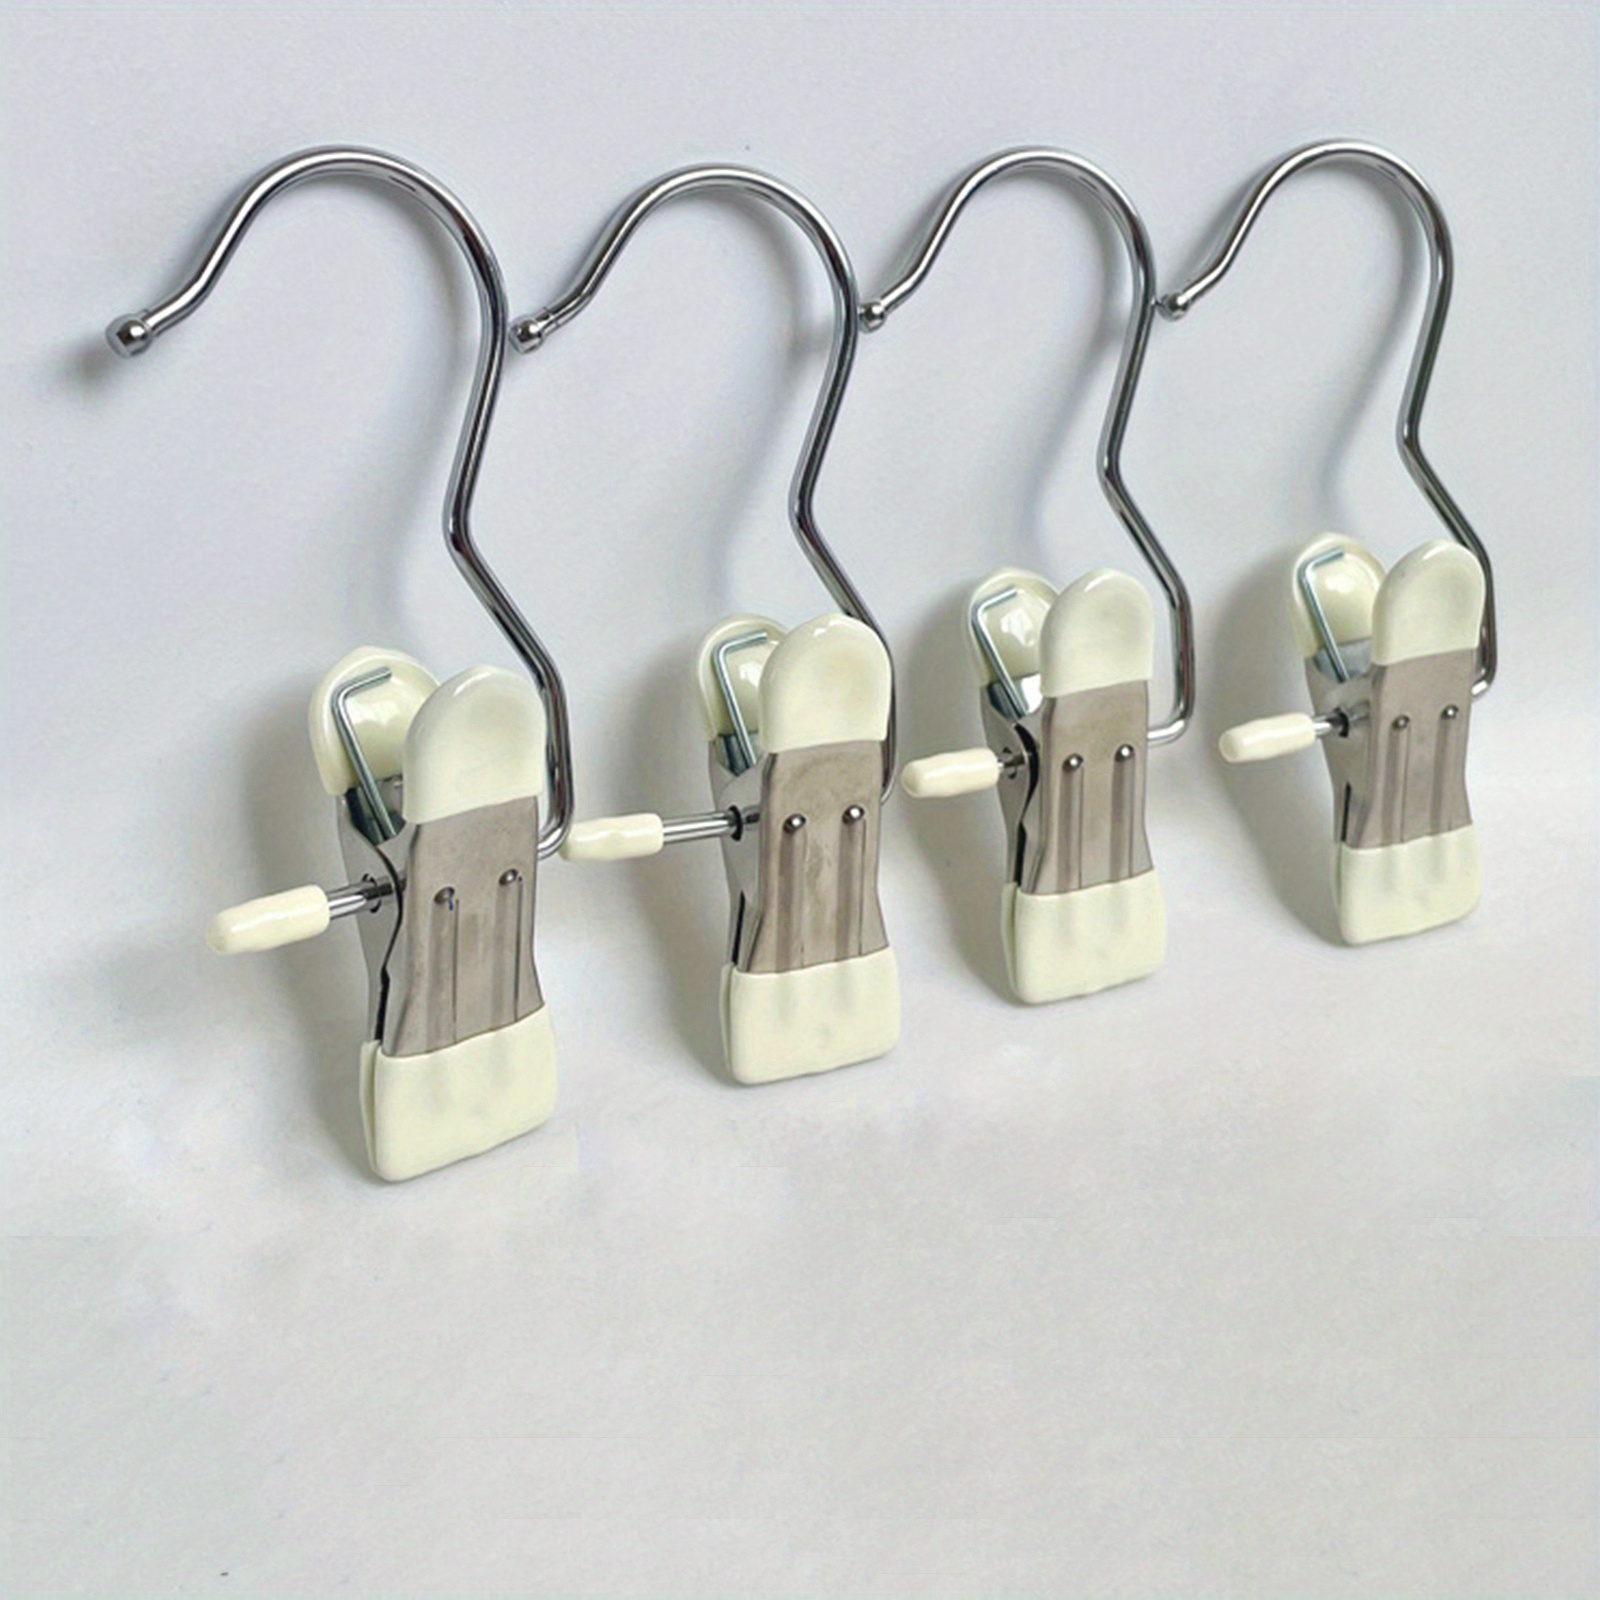 Stainless Steel 4 Hook Wall Mounted Hanger, For Cloth Hanging